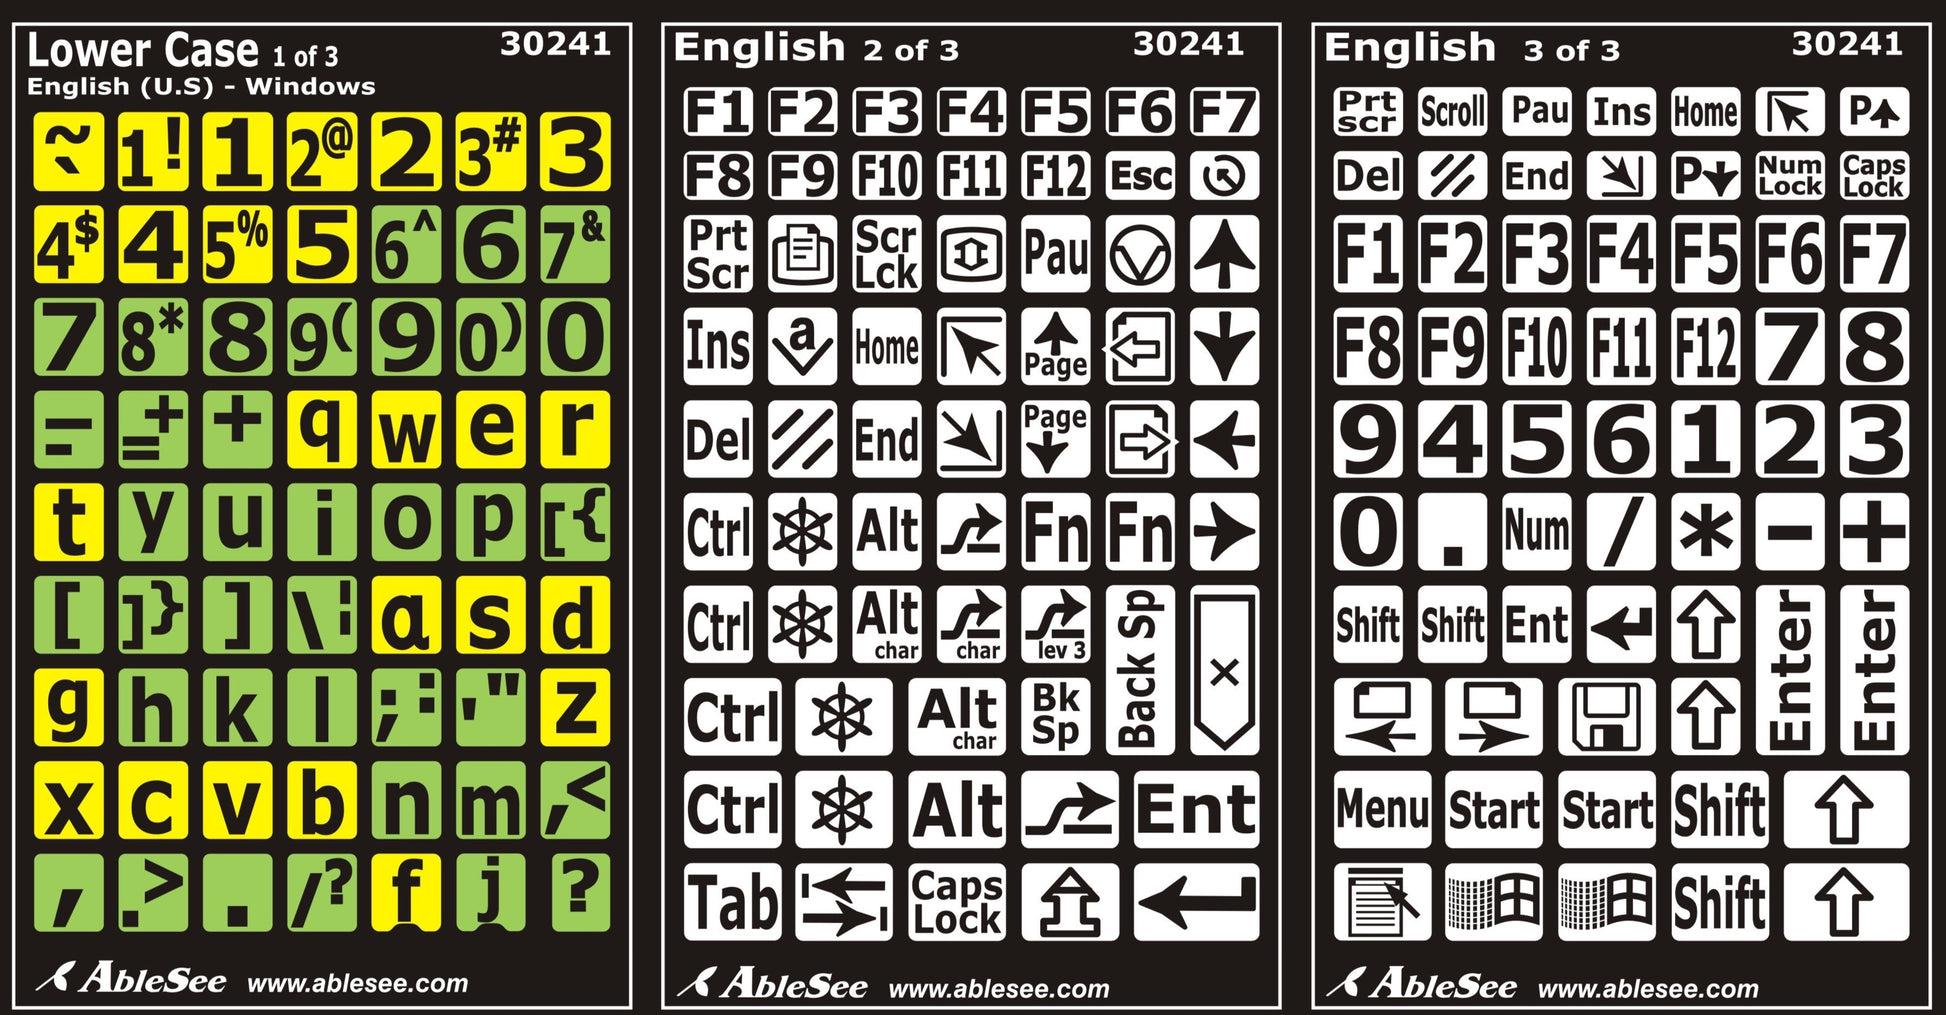 stickers-to-split-keyboard-into-rows-lowercase-30241